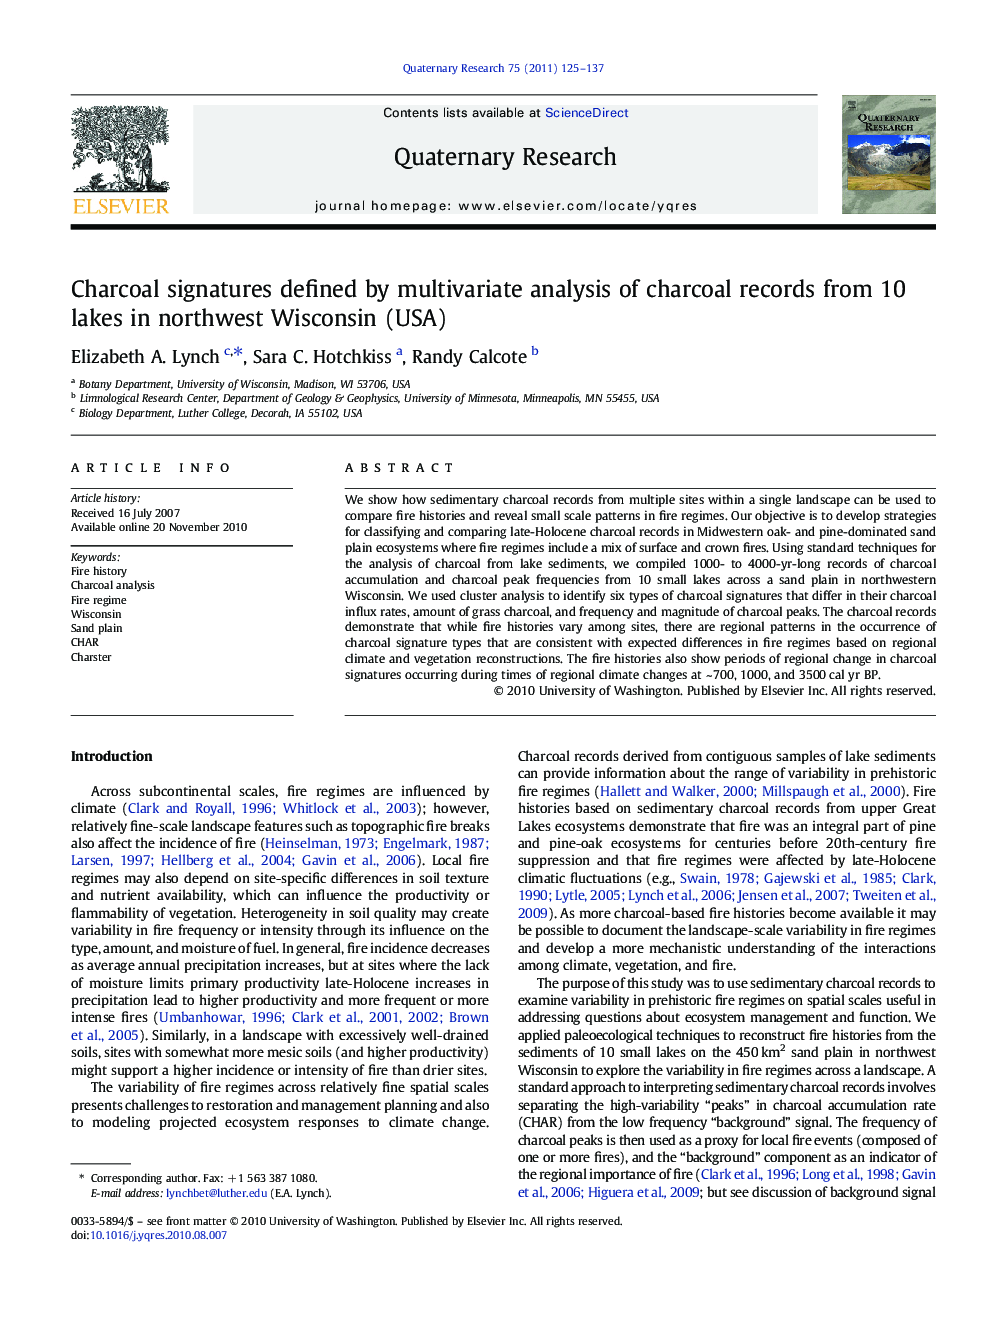 Charcoal signatures defined by multivariate analysis of charcoal records from 10 lakes in northwest Wisconsin (USA)